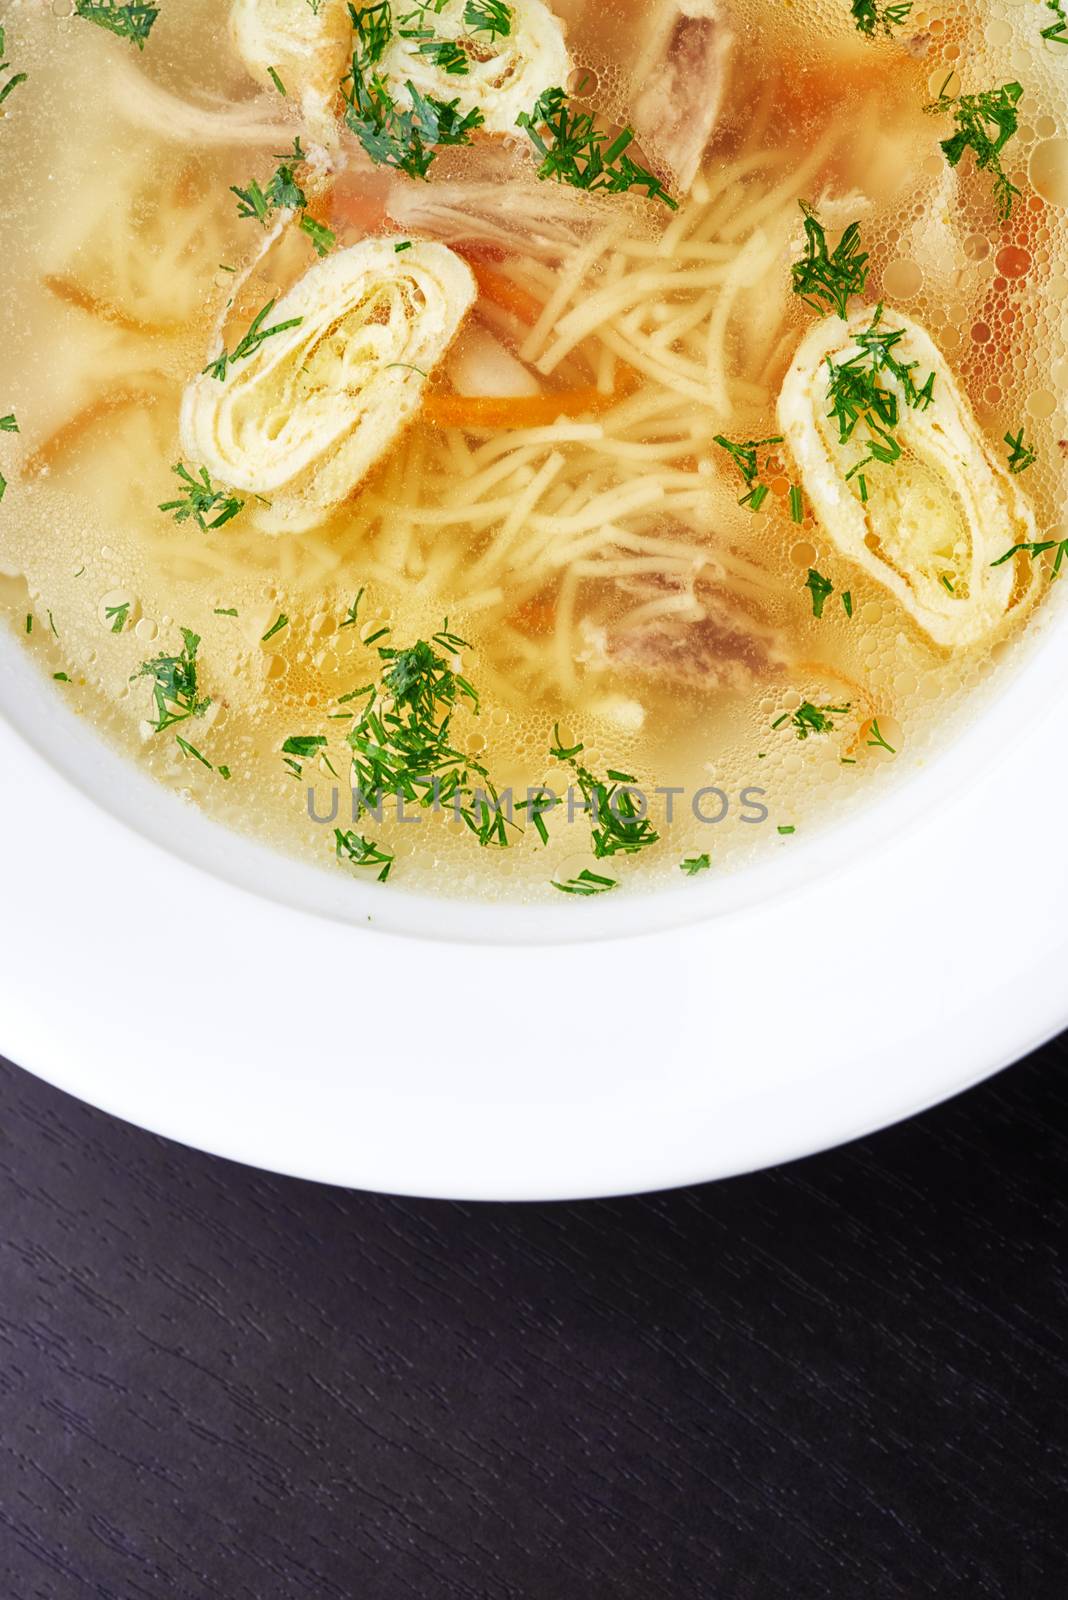 Clear chicken broth with vegetables and noodles